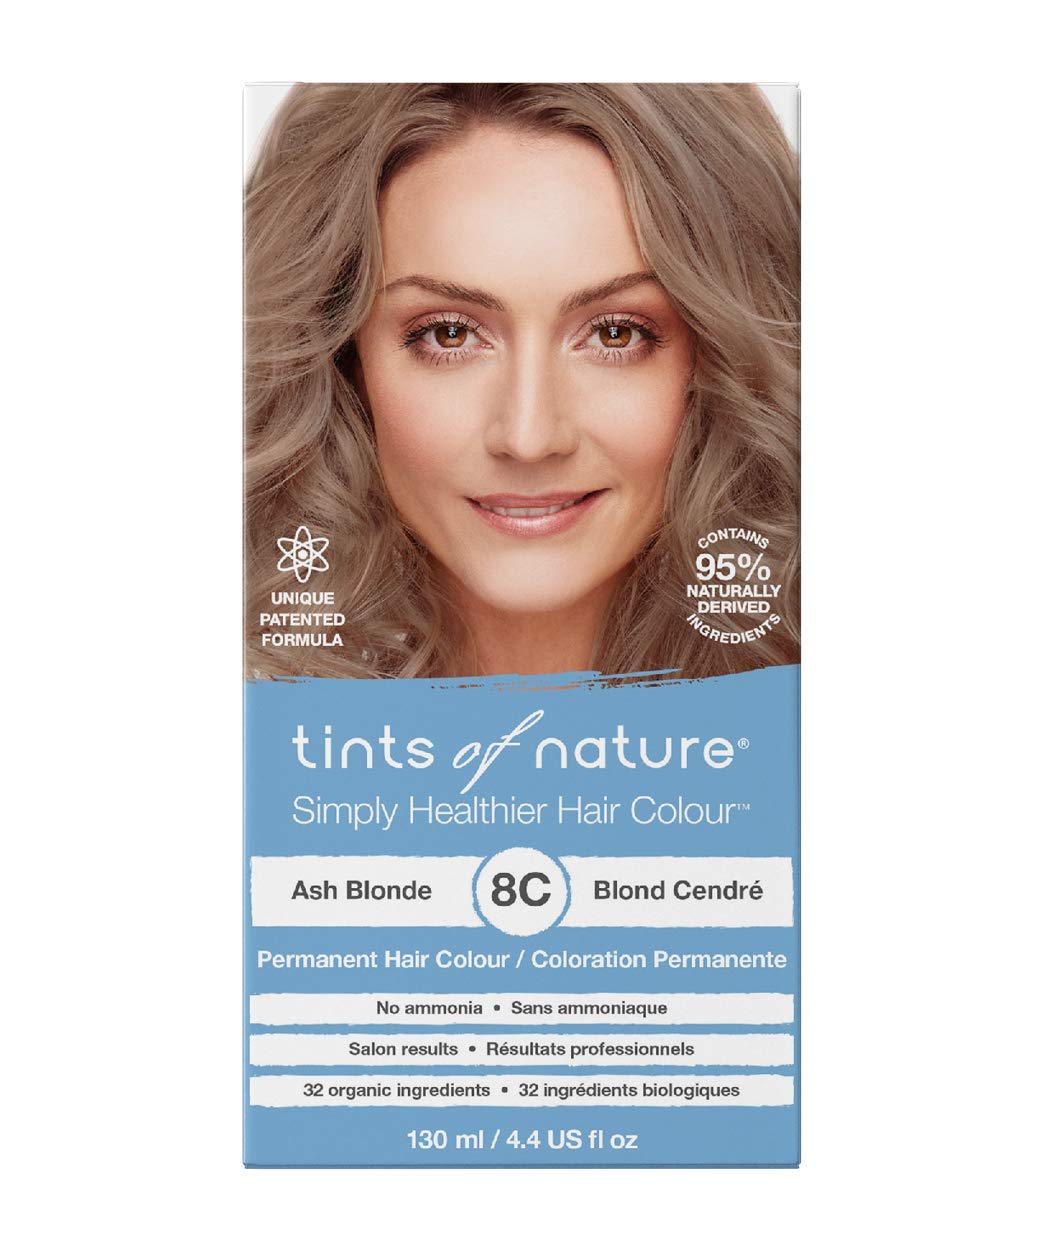 Tints of Nature Ash Blonde Permanent Hair Dye 8C Nourishes Hair & Covers Greys - Single Pack, ‎ash (8c)